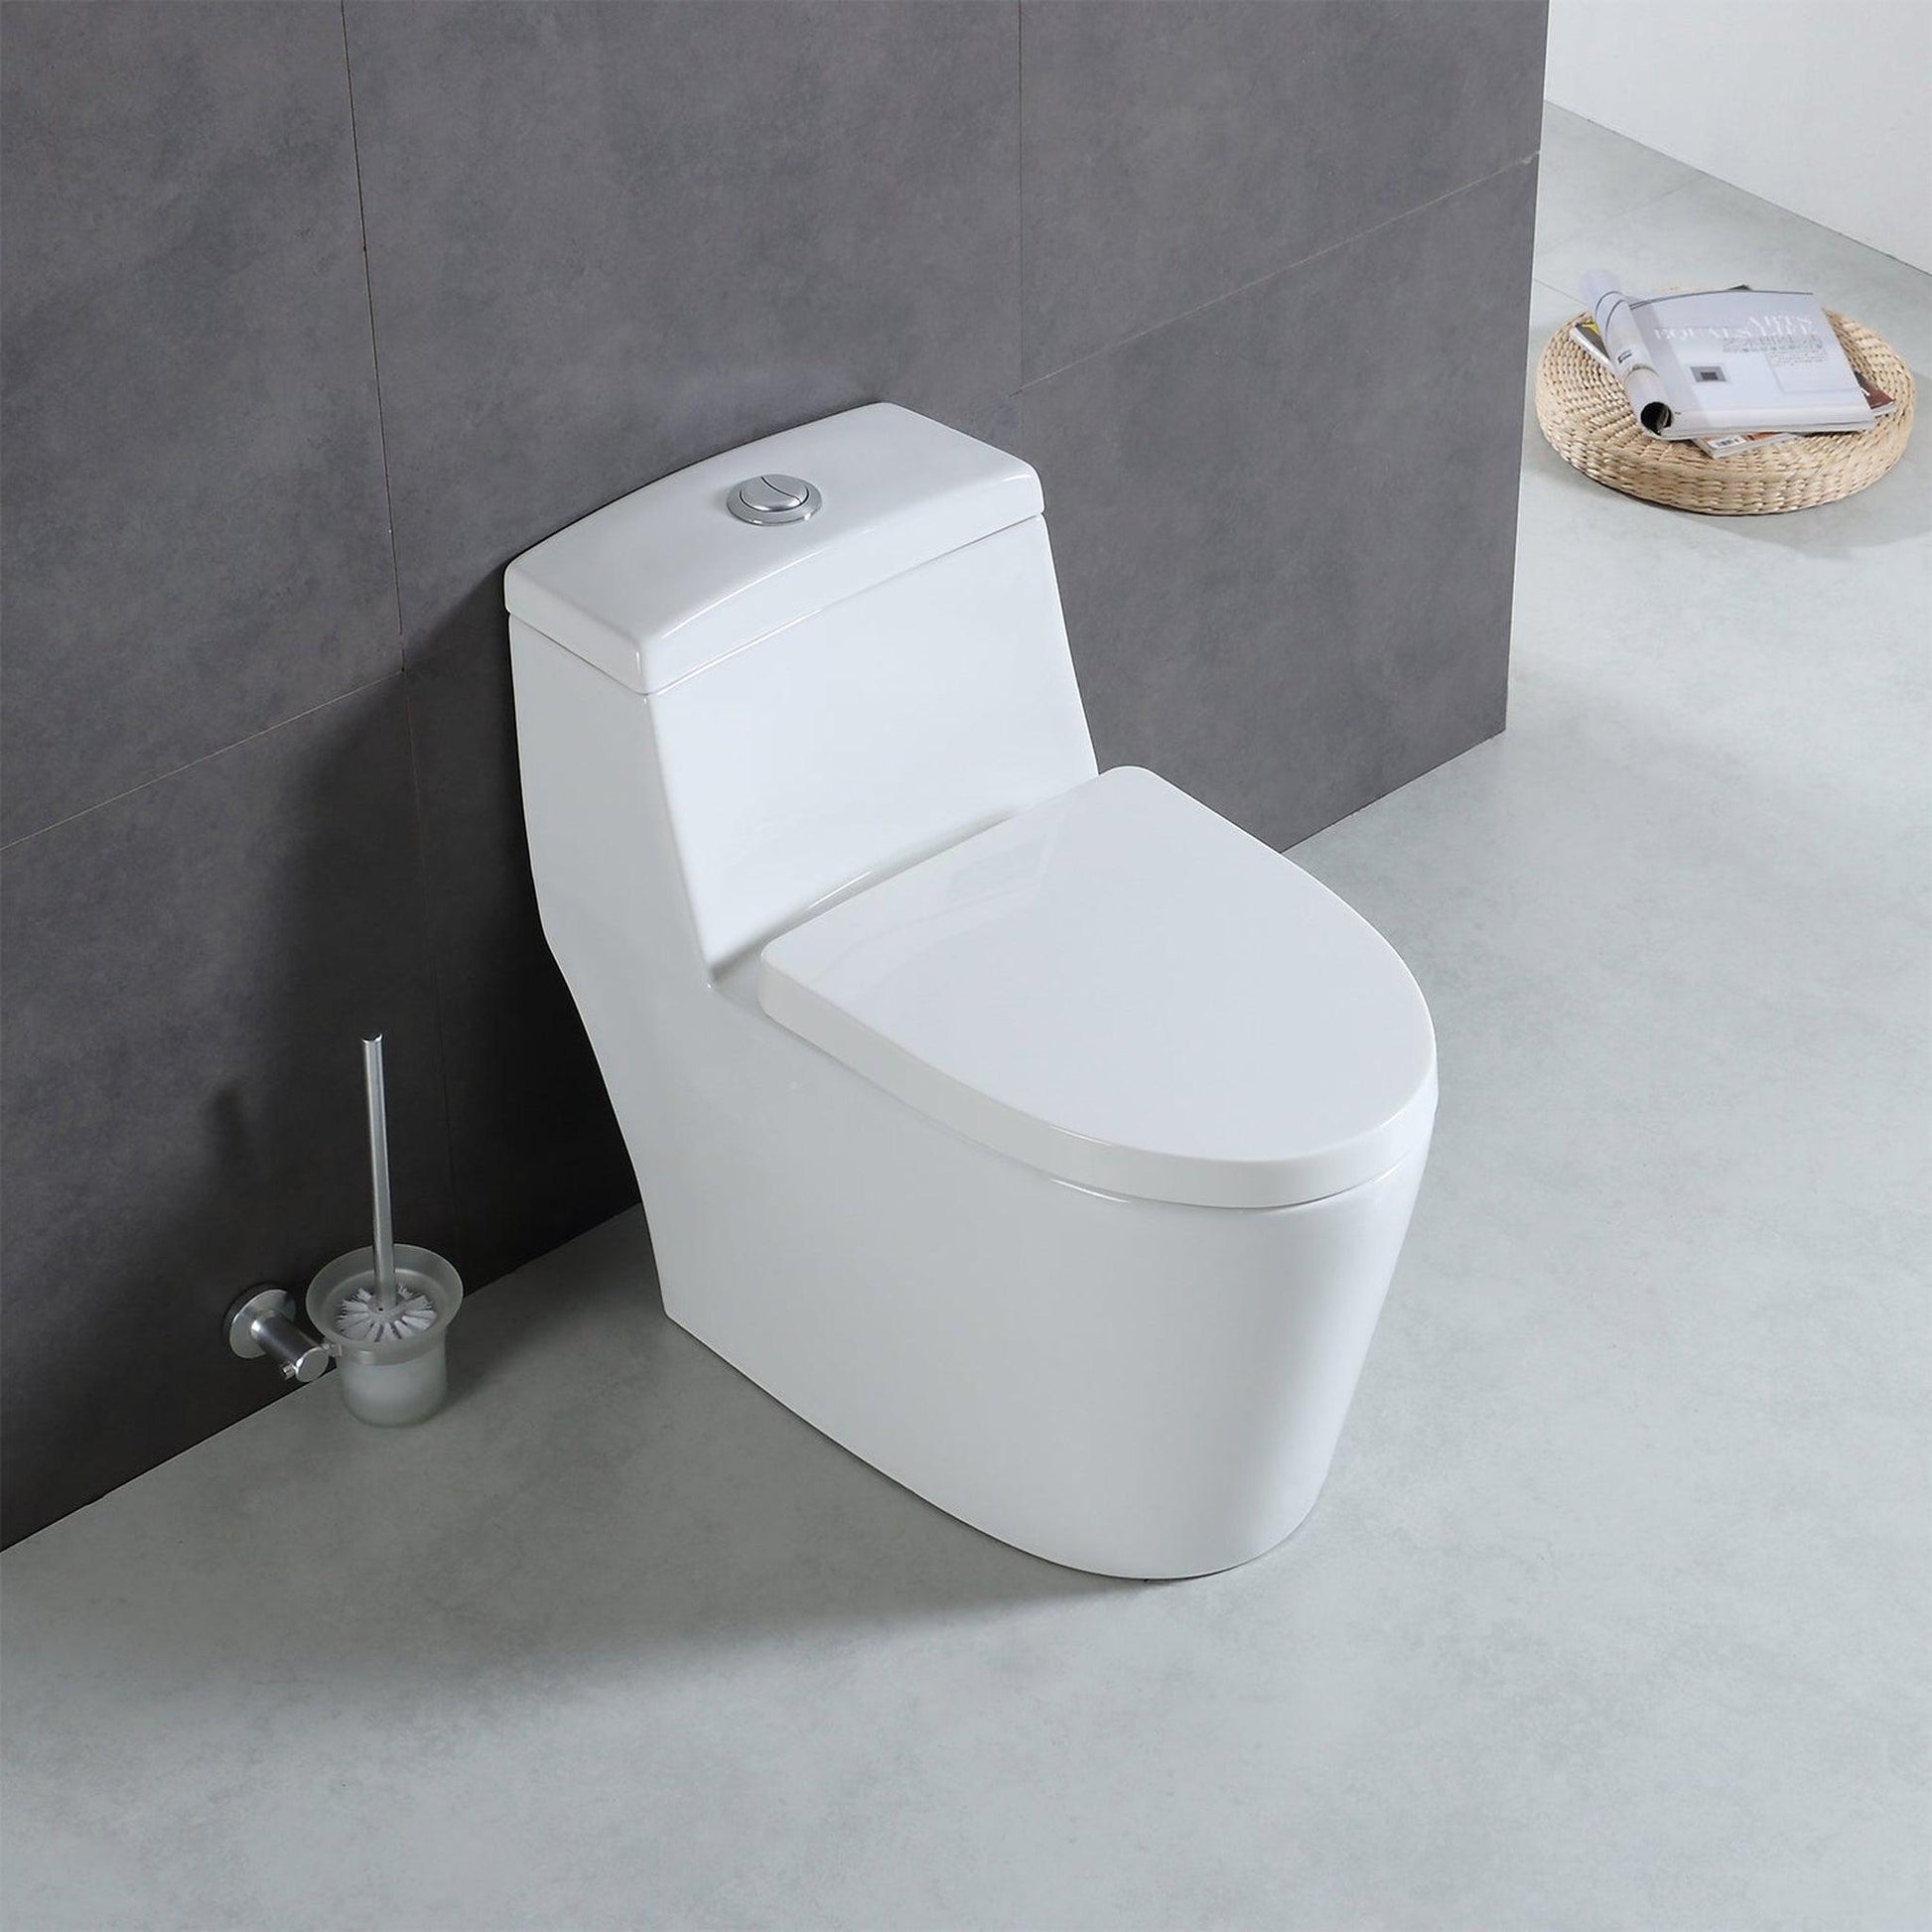 Blossom T9 05 1.1 / 1.6 GPF Dual Flush White One Piece Toilet With Slow-closing Seat Cover